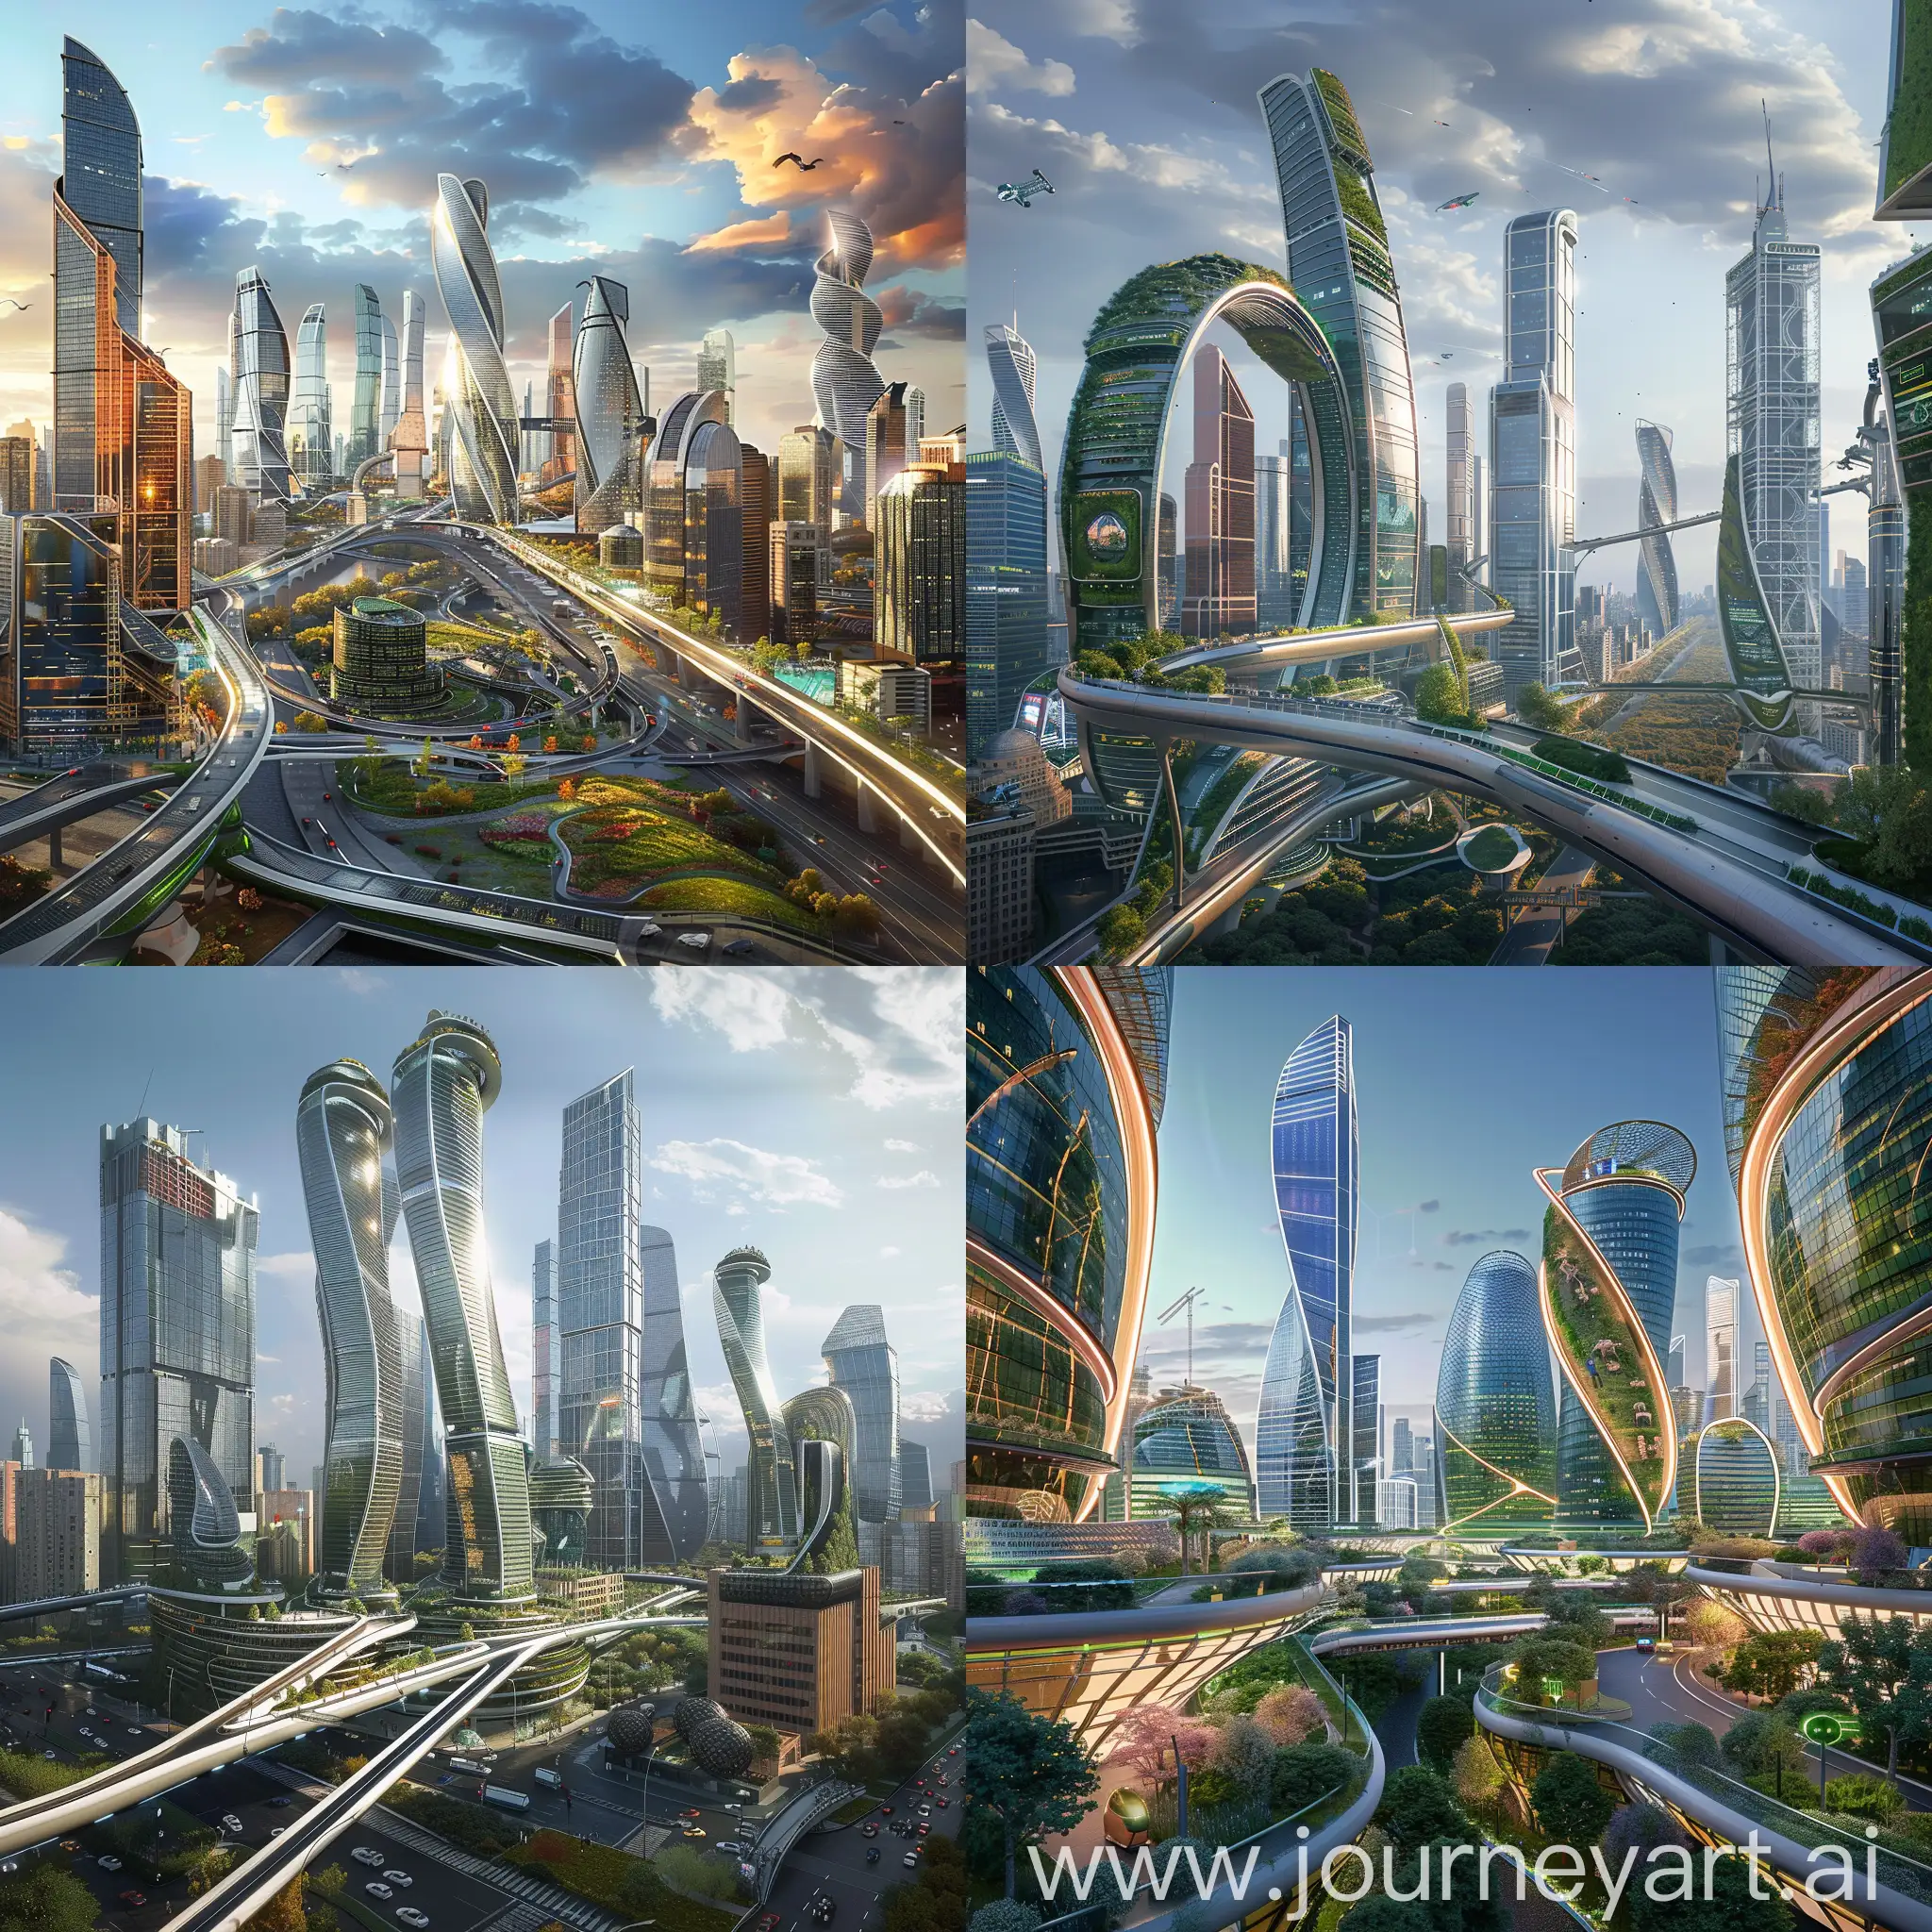 Futuristic Moscow, Biometric Apartments (AI & IoT), Vertical Gardens (Advanced Materials & Nanotechnology), Smart Traffic Management (Quantum Computing & IoT), Educational AR Overlays (AR & Education), Robo-Doctors & Gene Editing Clinics (Robotics & Gene Editing), Hyperloop Transportation (Advanced Materials & Engineering), 3D-Printed Infrastructure (3D Printing & Advanced Materials), Blockchain-Secured Records (Blockchain), VR Concert Halls & Theaters (VR & Entertainment), Nanotech-Powered Self-Cleaning Surfaces (Nanotechnology), Kinetic Skyscrapers (Futurism & AI), Vertical Forests & Biodomes (Advanced Materials & Sustainability), Hyperconnected Skybridges (IoT & Robotics), AR City Overlays (AR & Information Access), Quantum Computing Powered City Grid (Quantum Computing & Sustainability), Modular, 3D-Printed Housing (3D Printing & Advanced Materials), Drone Delivery Network (Robotics & IoT), Nanotech-Coated Public Spaces (Nanotechnology & Sustainability), Blockchain-Secured Public Services (Blockchain), Dynamic Public Art Installations (AI & Robotics), in unreal engine 5 style --stylize 1000